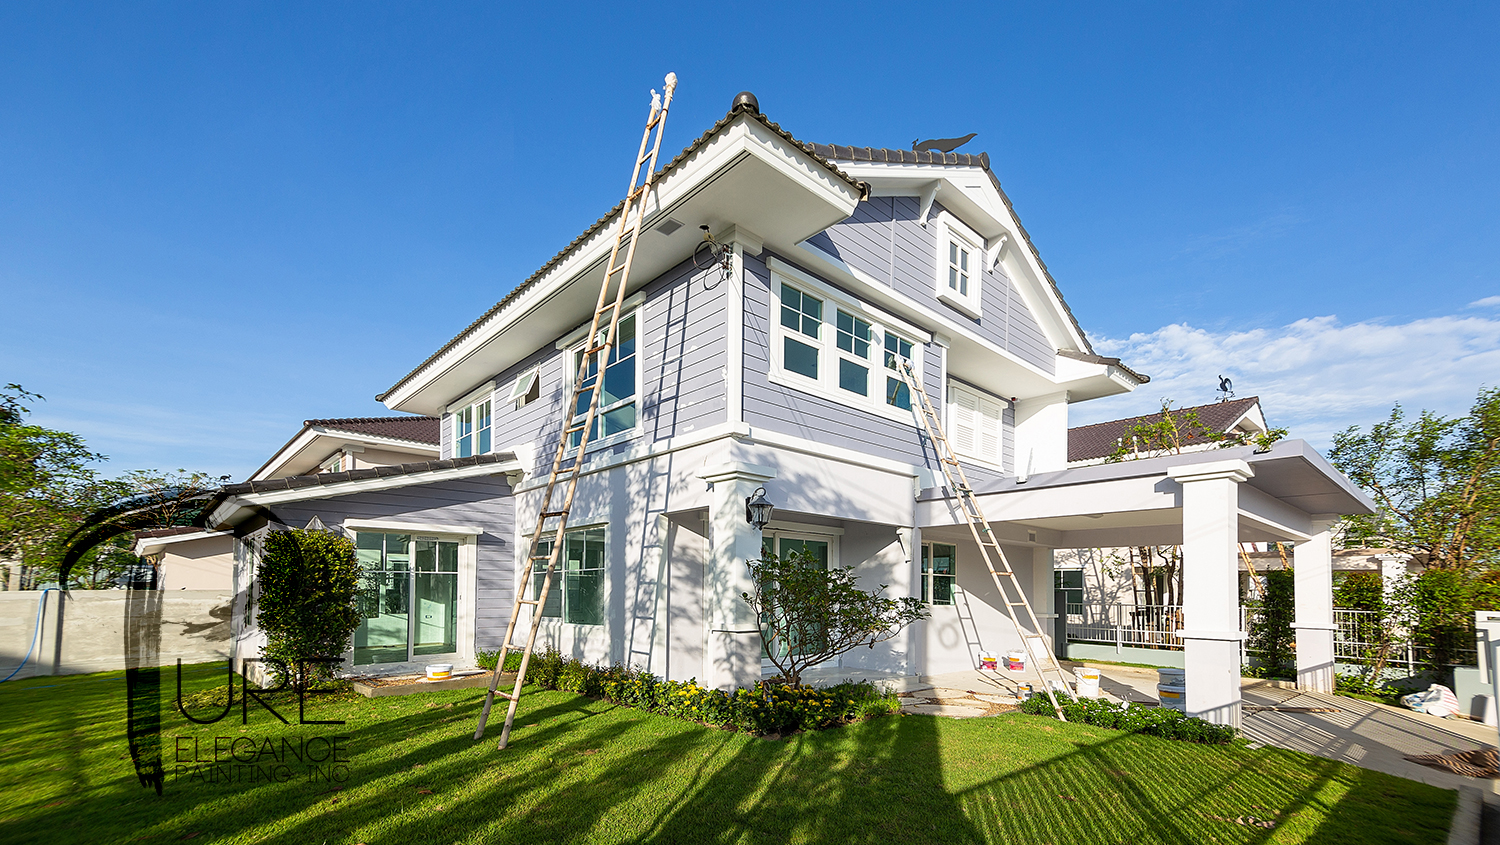 Exterior Painting Services in Roswell & Alpharetta GA